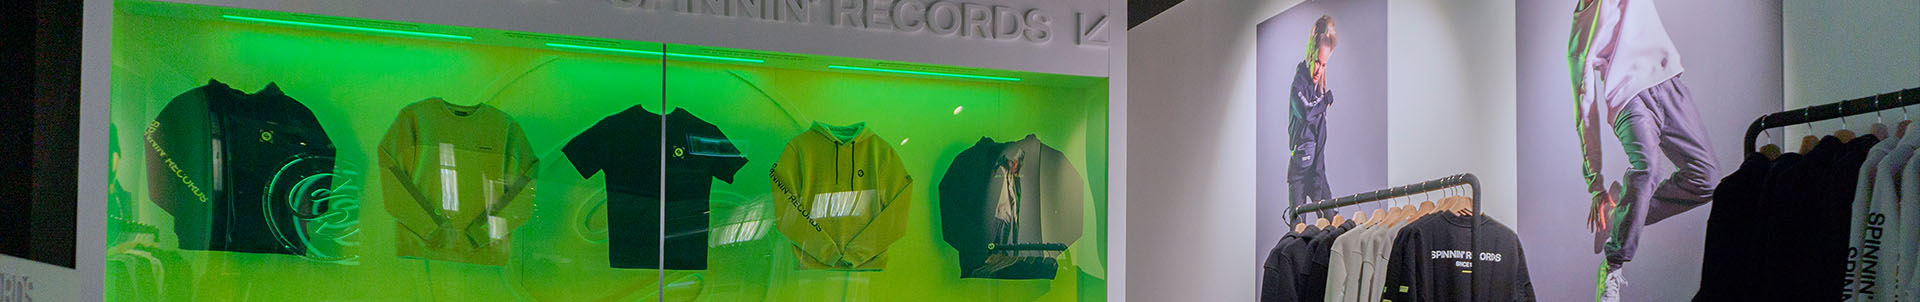 Spinnin' Records Pop-up Store officially open!